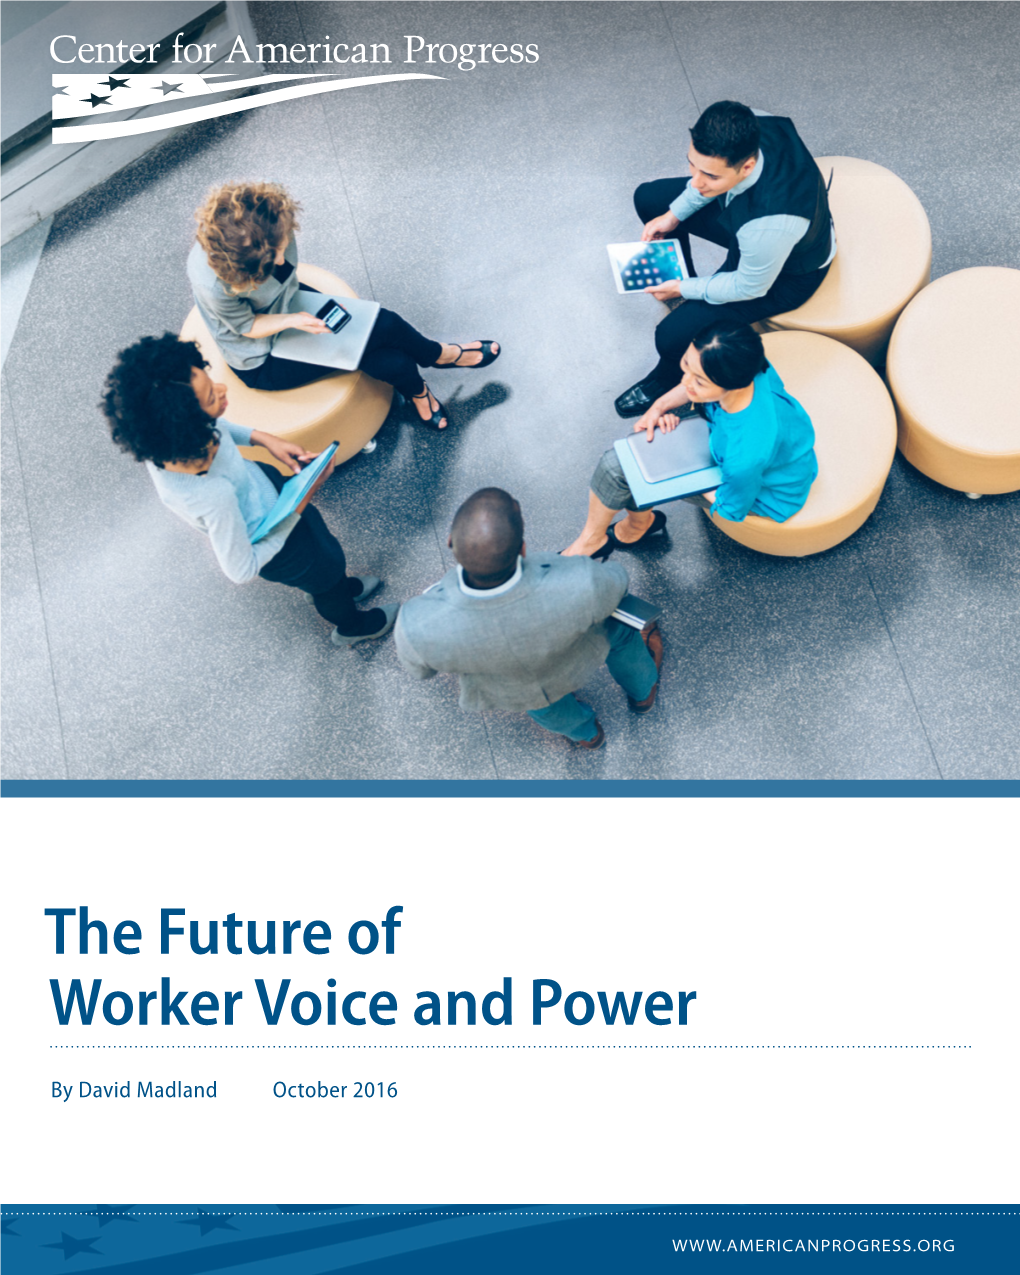 The Future of Worker Voice and Power